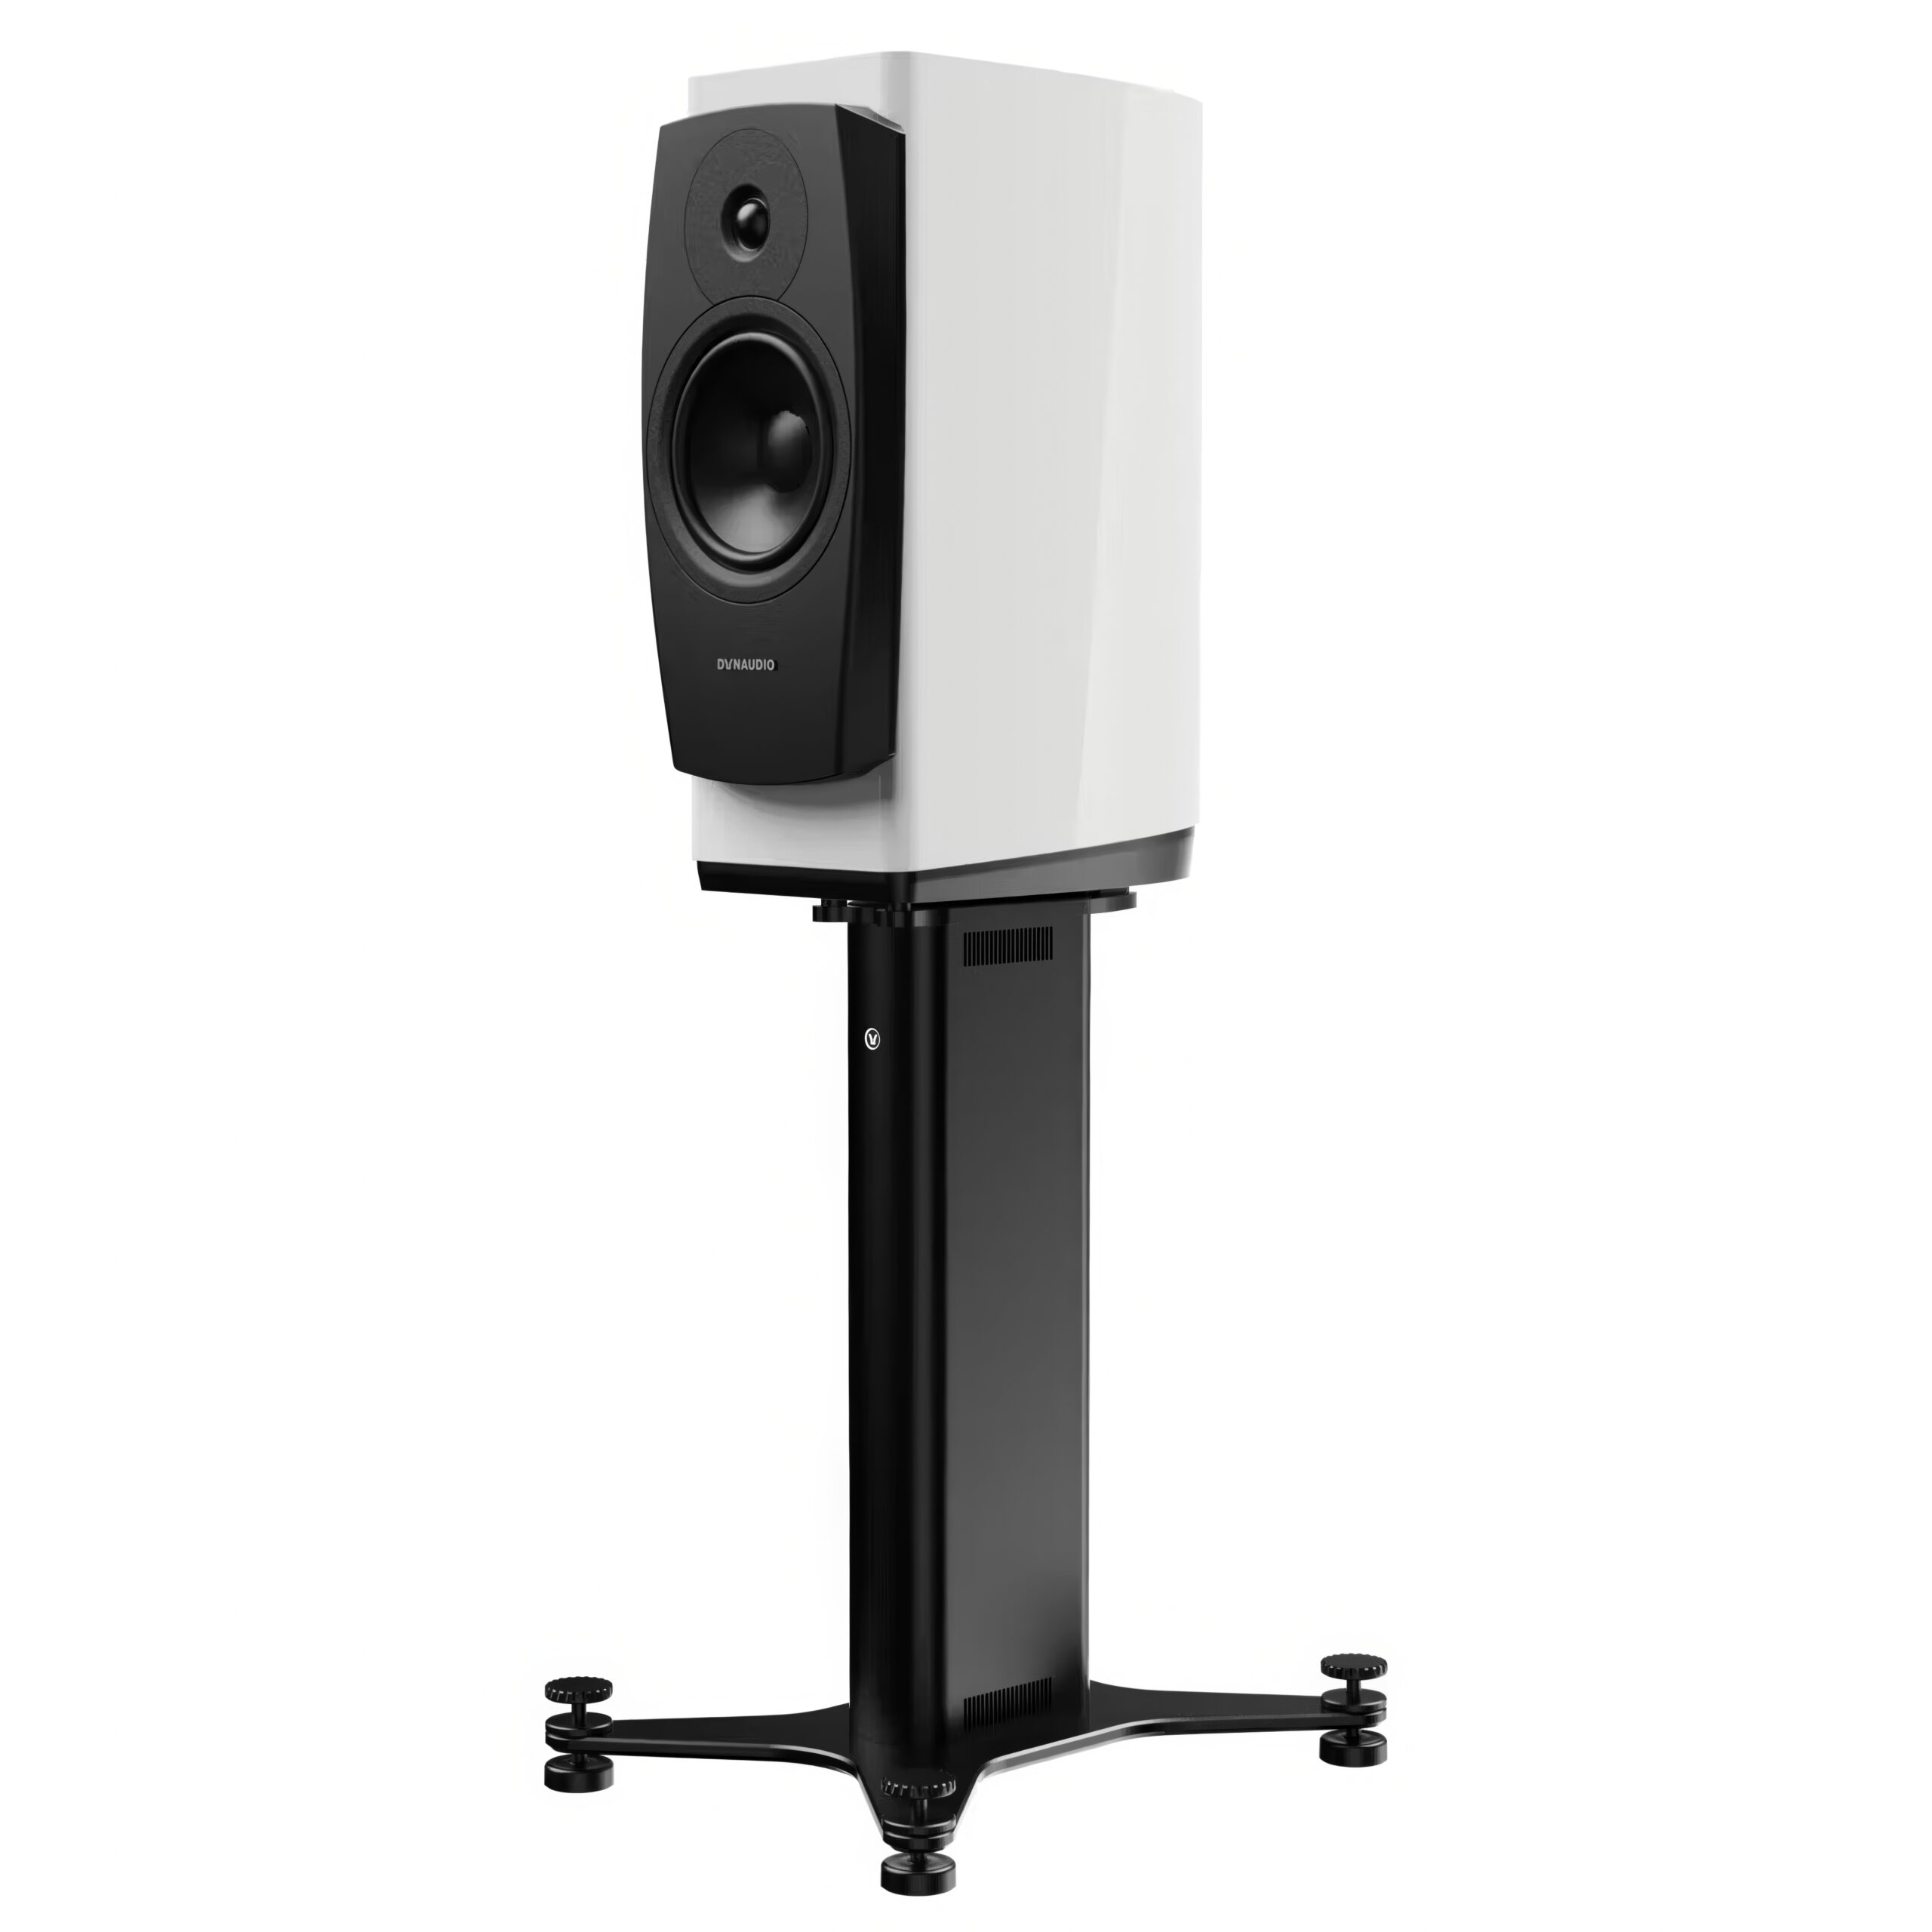 Dynaudio Confidence 20A-resized-text-shapes-3840w